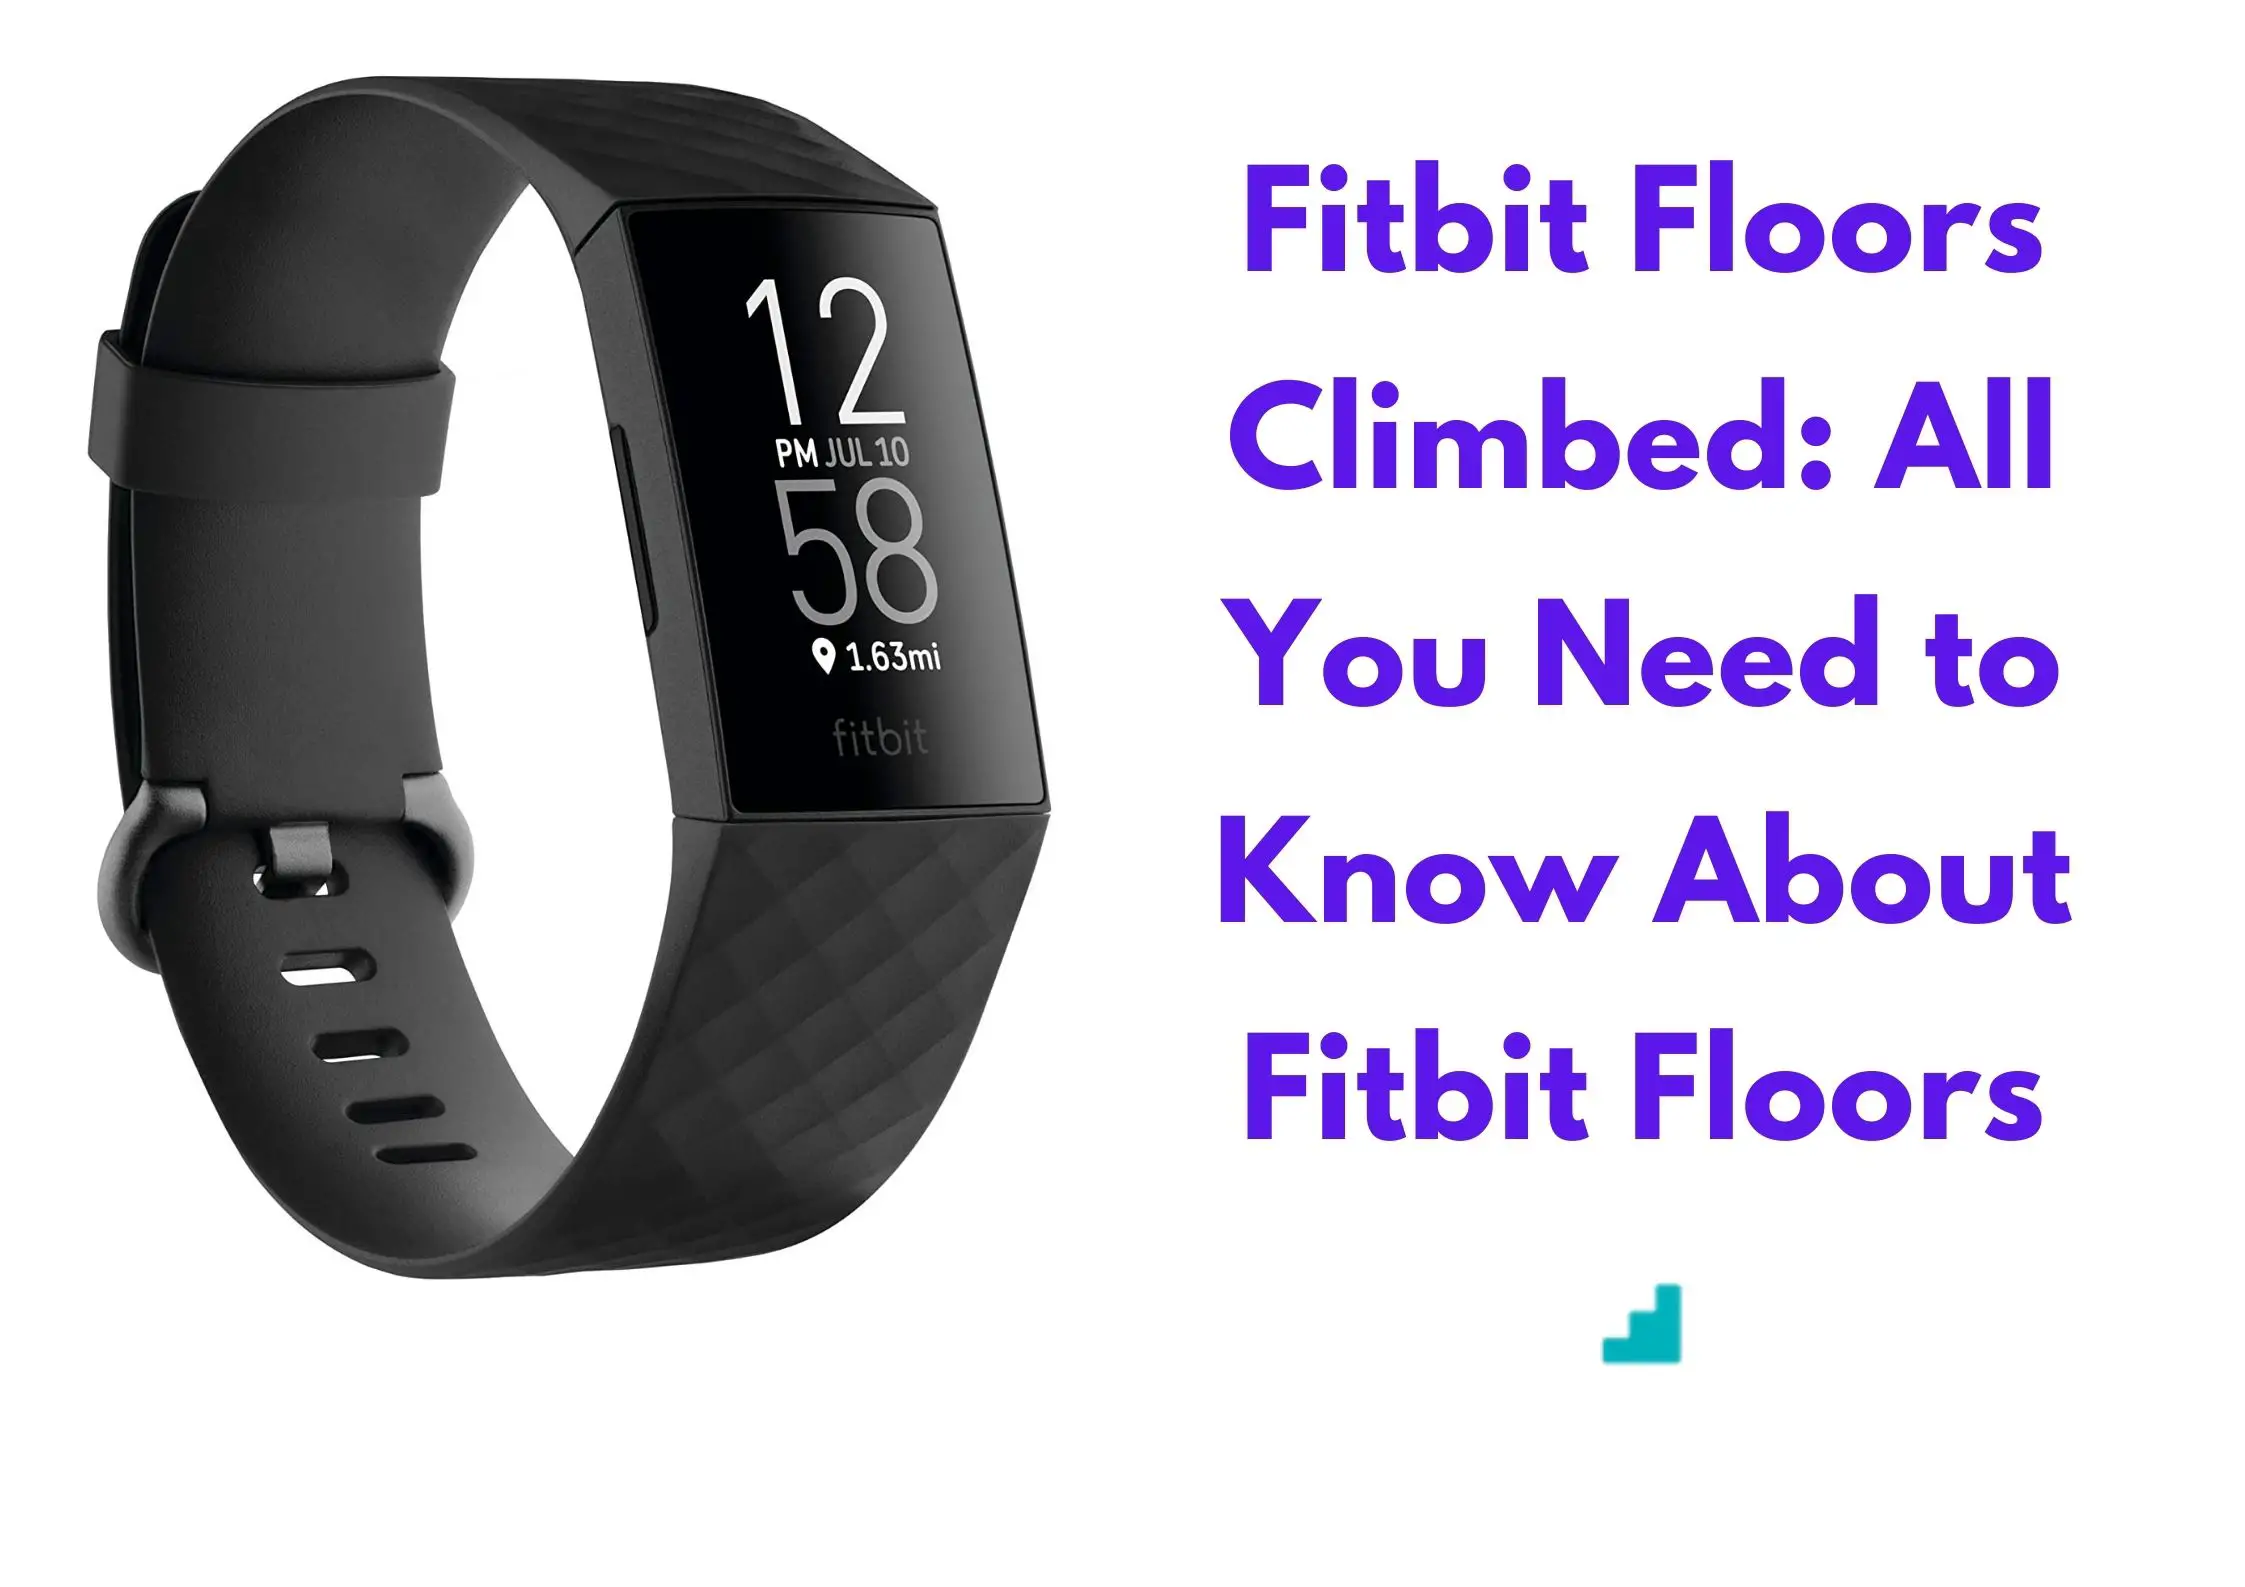 Fitbit Floors Climbed: All You Need to Know About Fitbit Floors